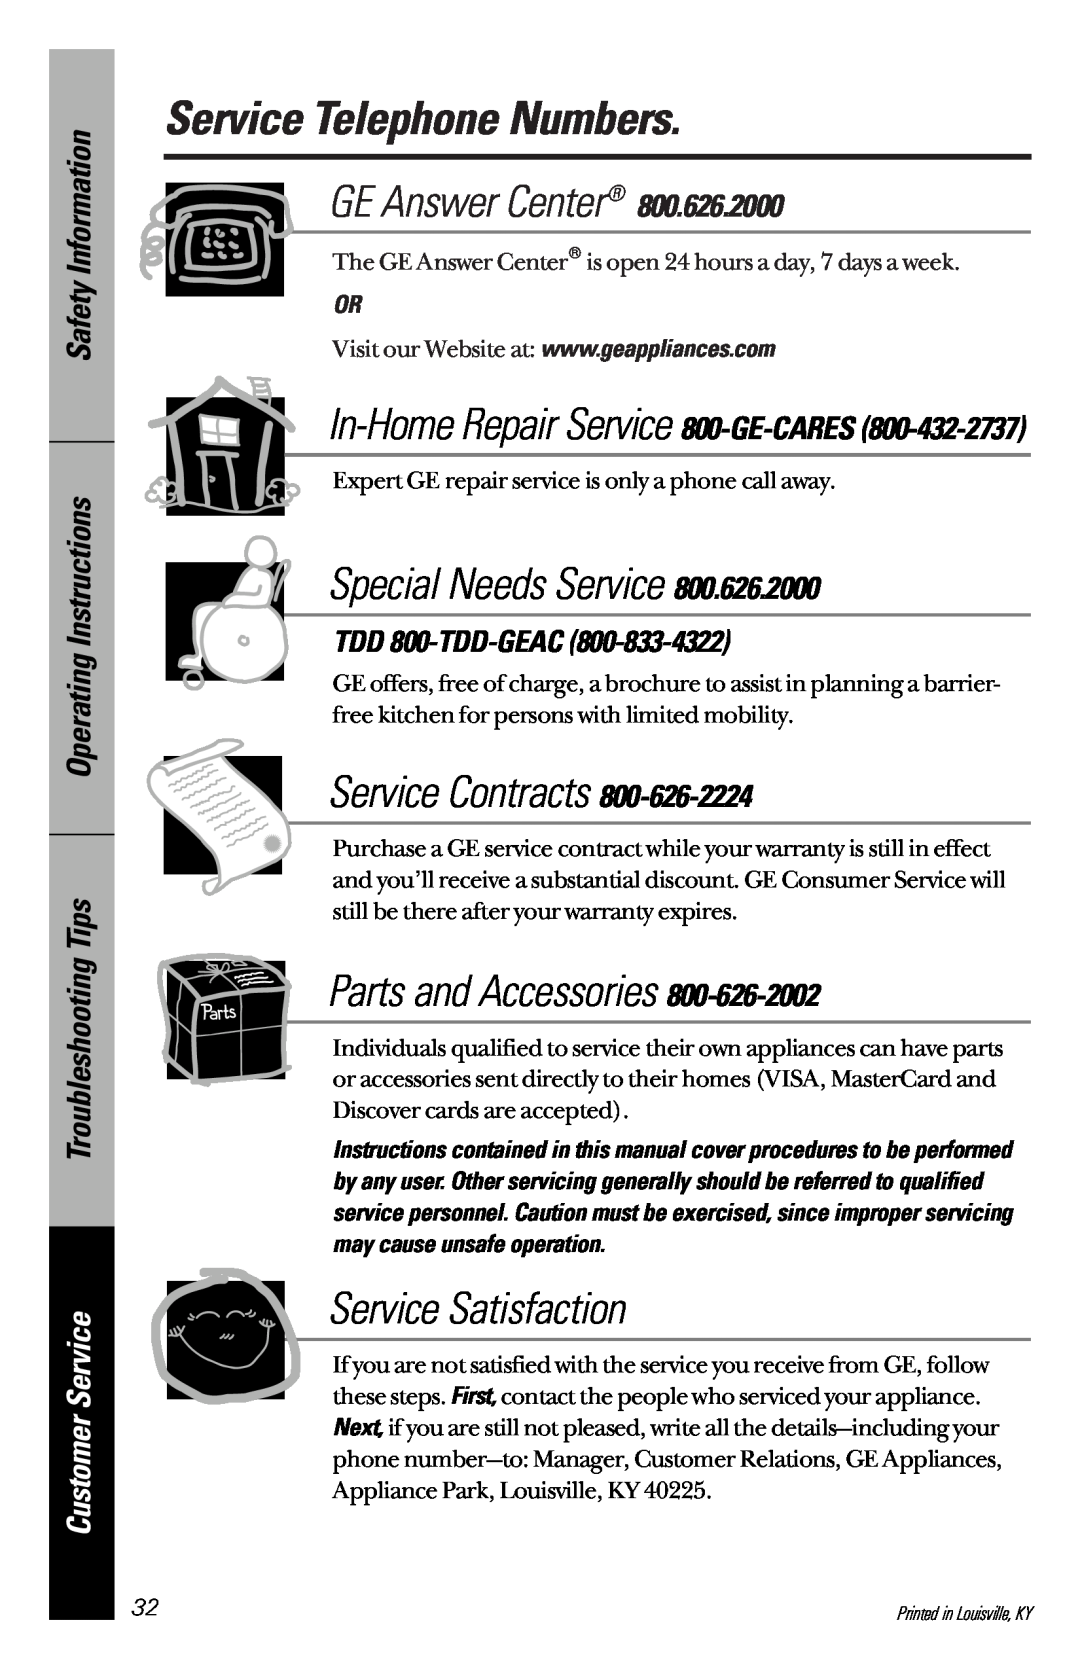 GE GSD3900 series Service Telephone Numbers, GE Answer Center, Special Needs Service, Service Contracts, TDD 800-TDD-GEAC 